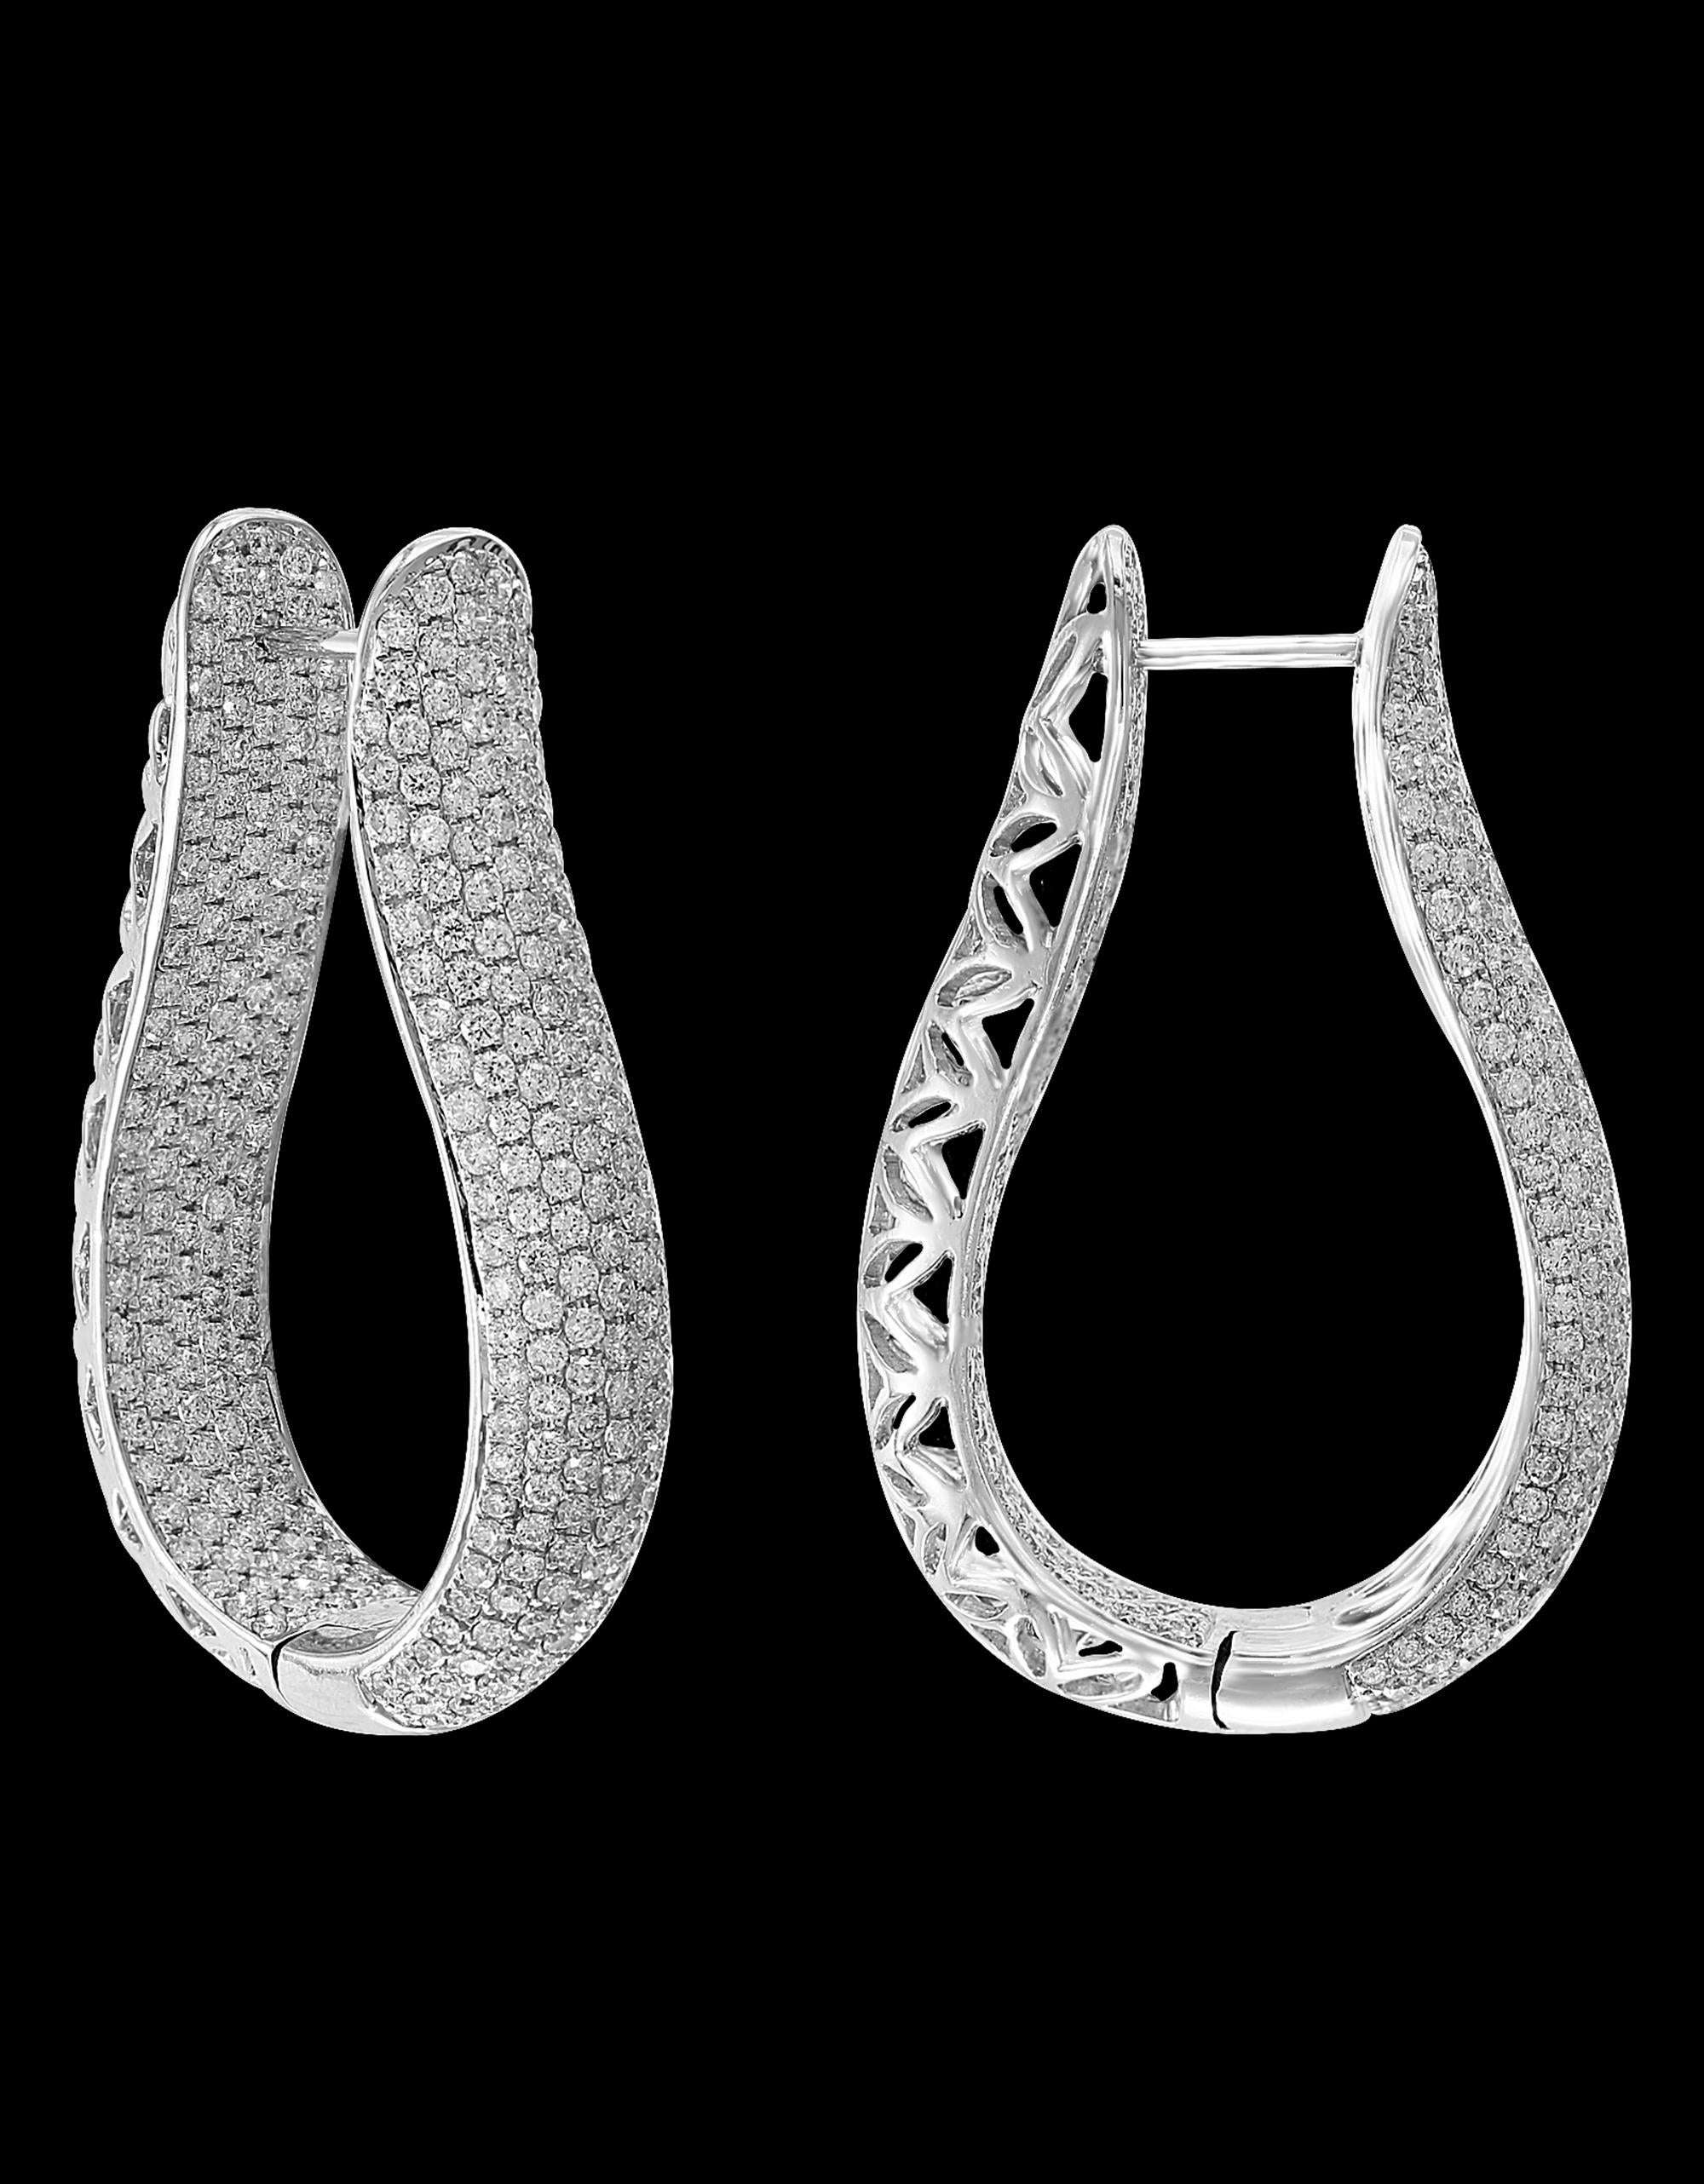 A fabulous pair of earrings with an enormous amount of look and sparkle!
These exquisite pair of earrings features round micropave  diamonds which are set without the prongs , weighing approximately 8 carat total set  in  18 karat white gold. These